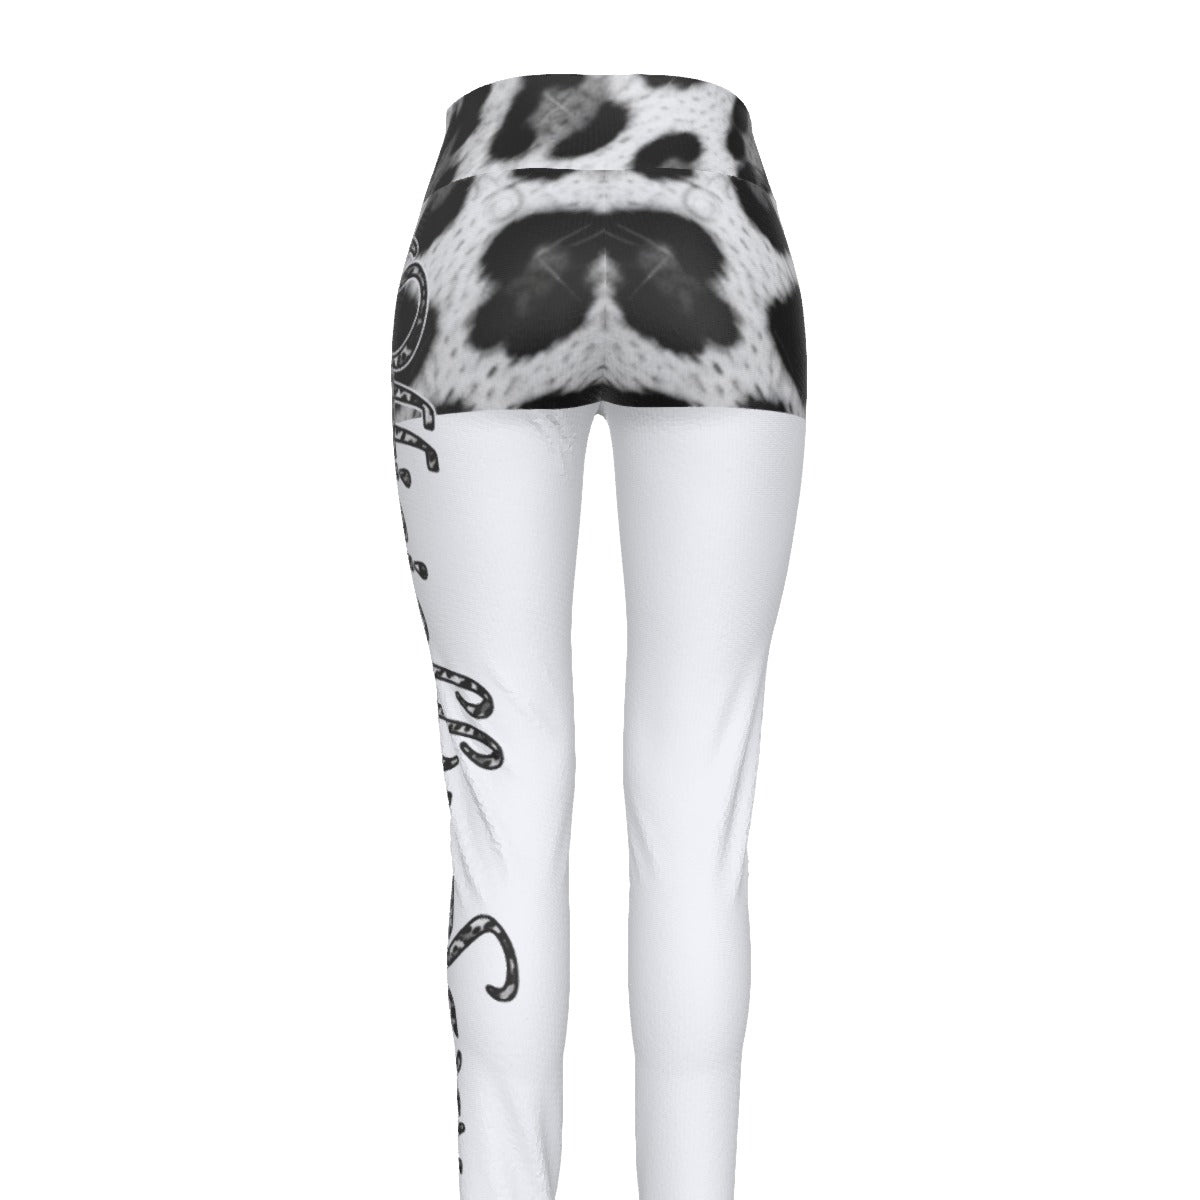  Officially Sexy Snow Leopard Print Collection Women's White AOP High Waist Booty Popper Leggings #2 (English) 3